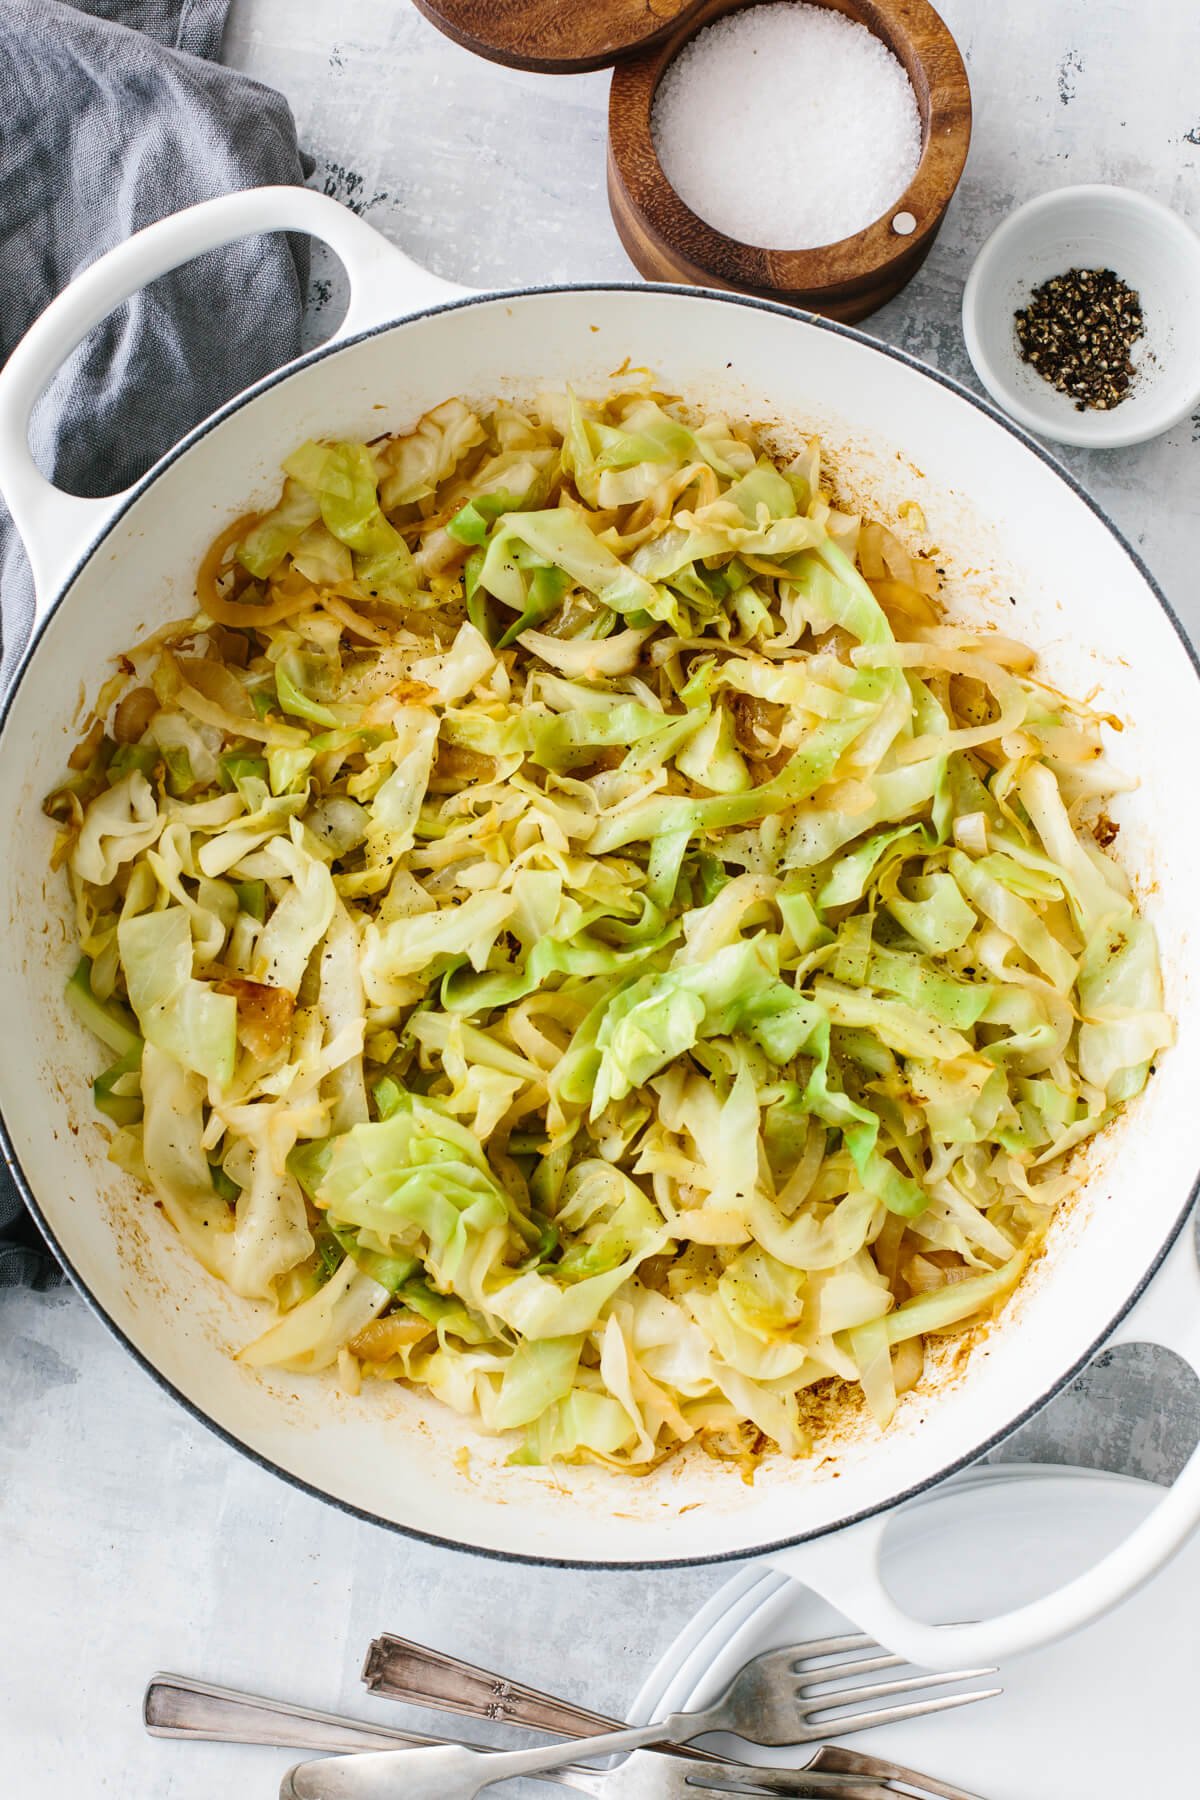 Sauteed cabbage in a pan on a table.